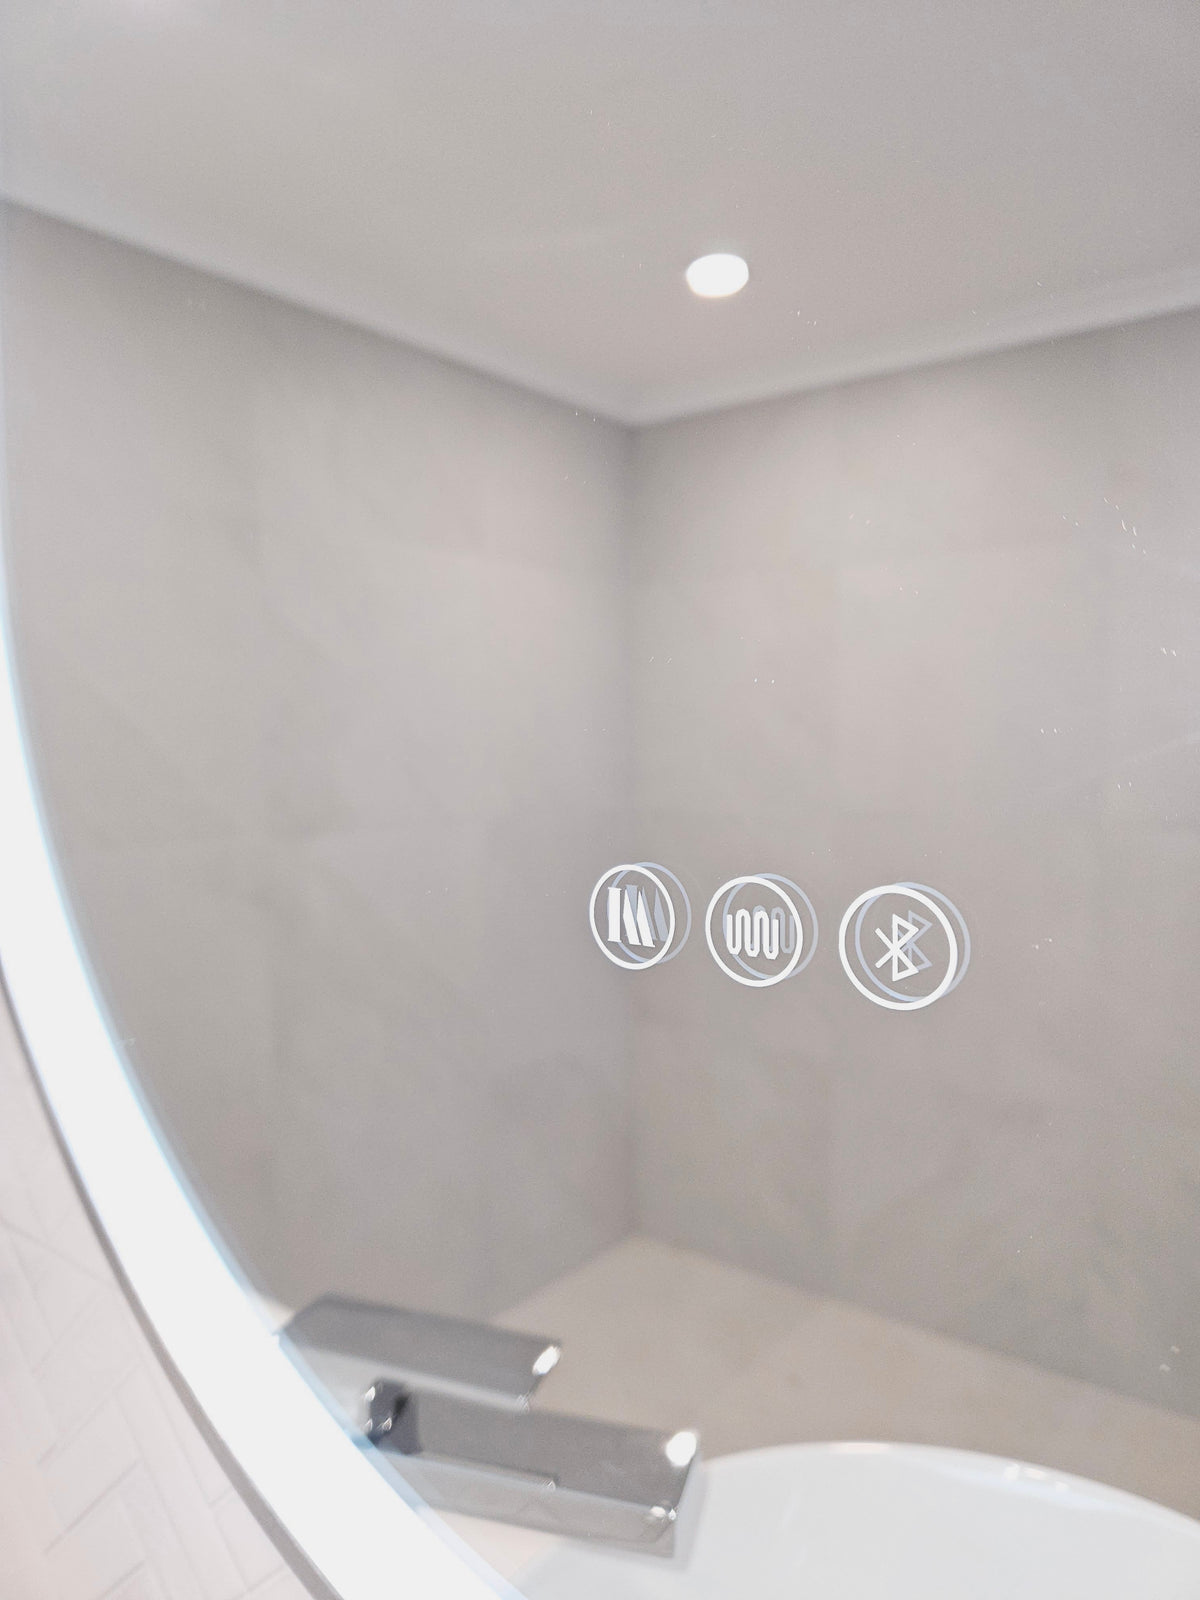 User-friendly Triple-Touch Buttons on Circle Smart LED Mirror